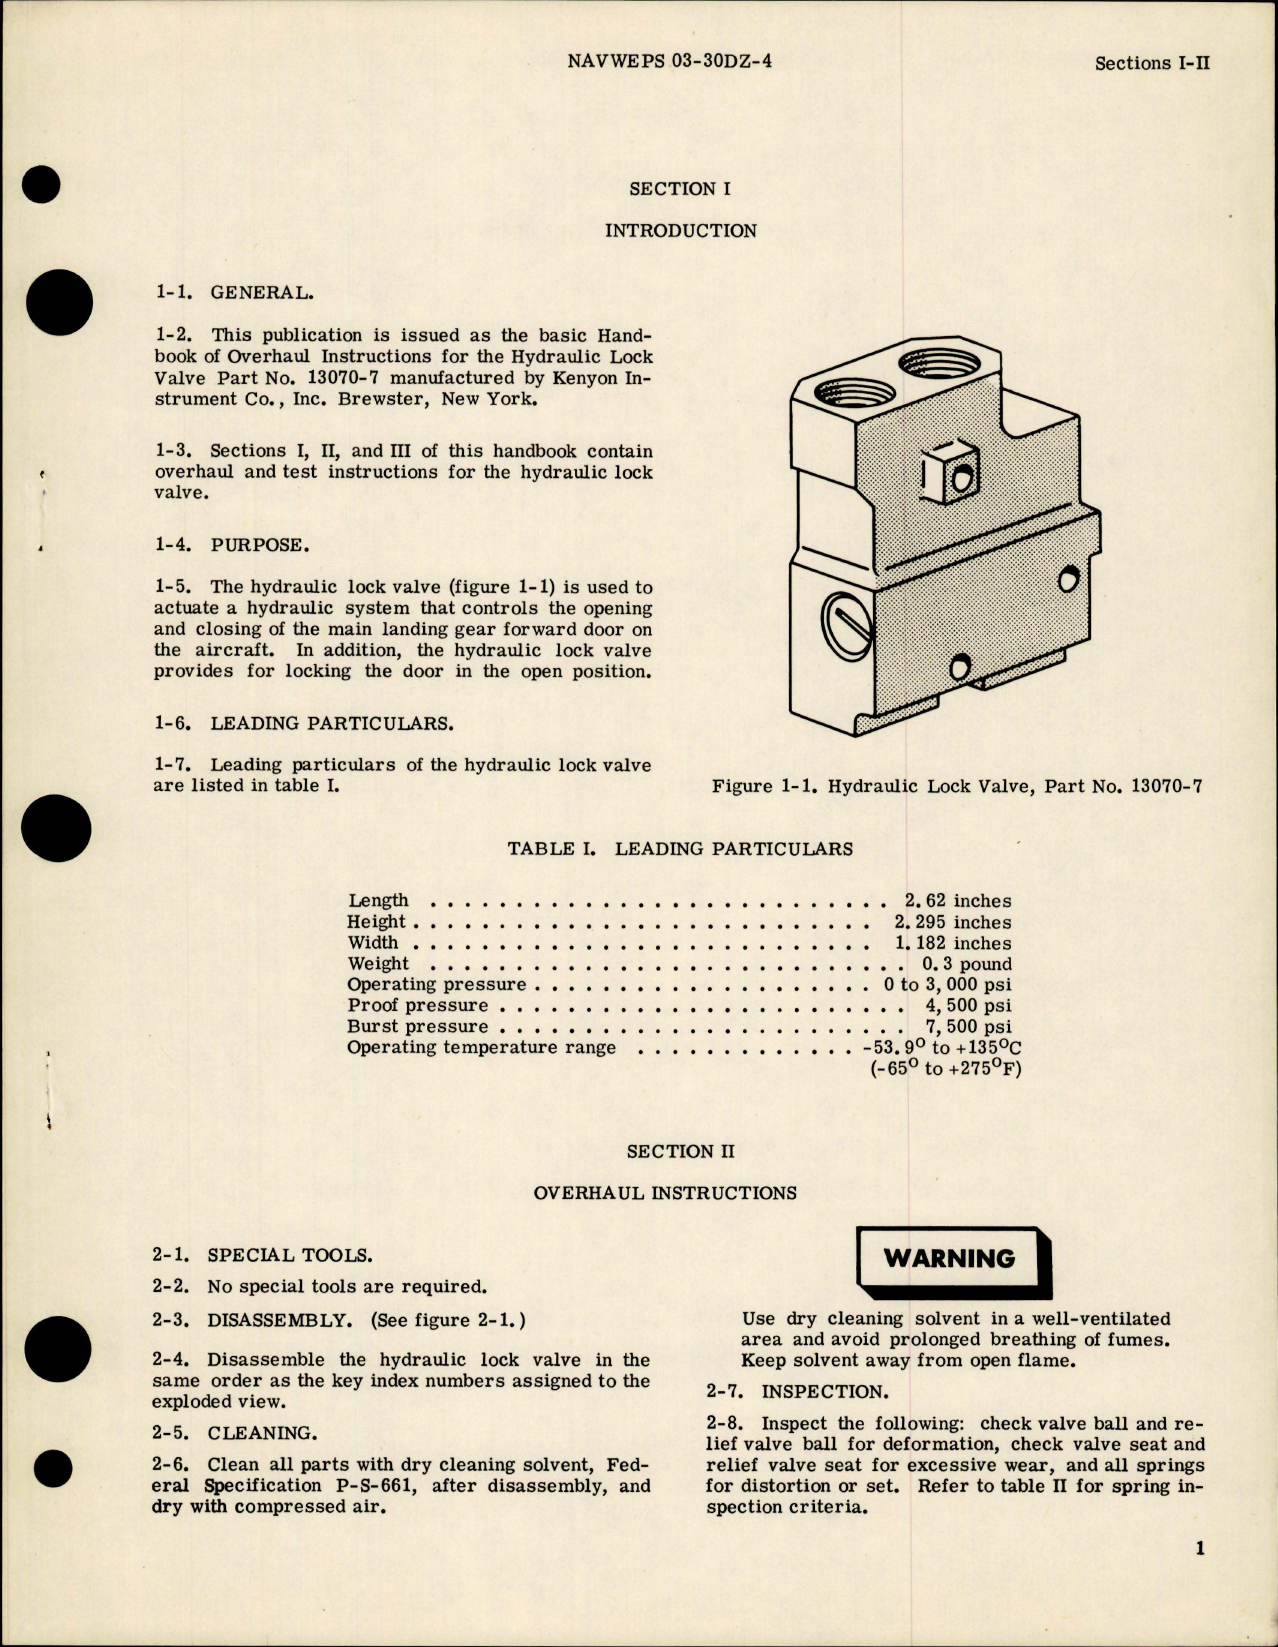 Sample page 5 from AirCorps Library document: Overhaul Instructions for Hydraulic Lock Valve - Part 13070-7 